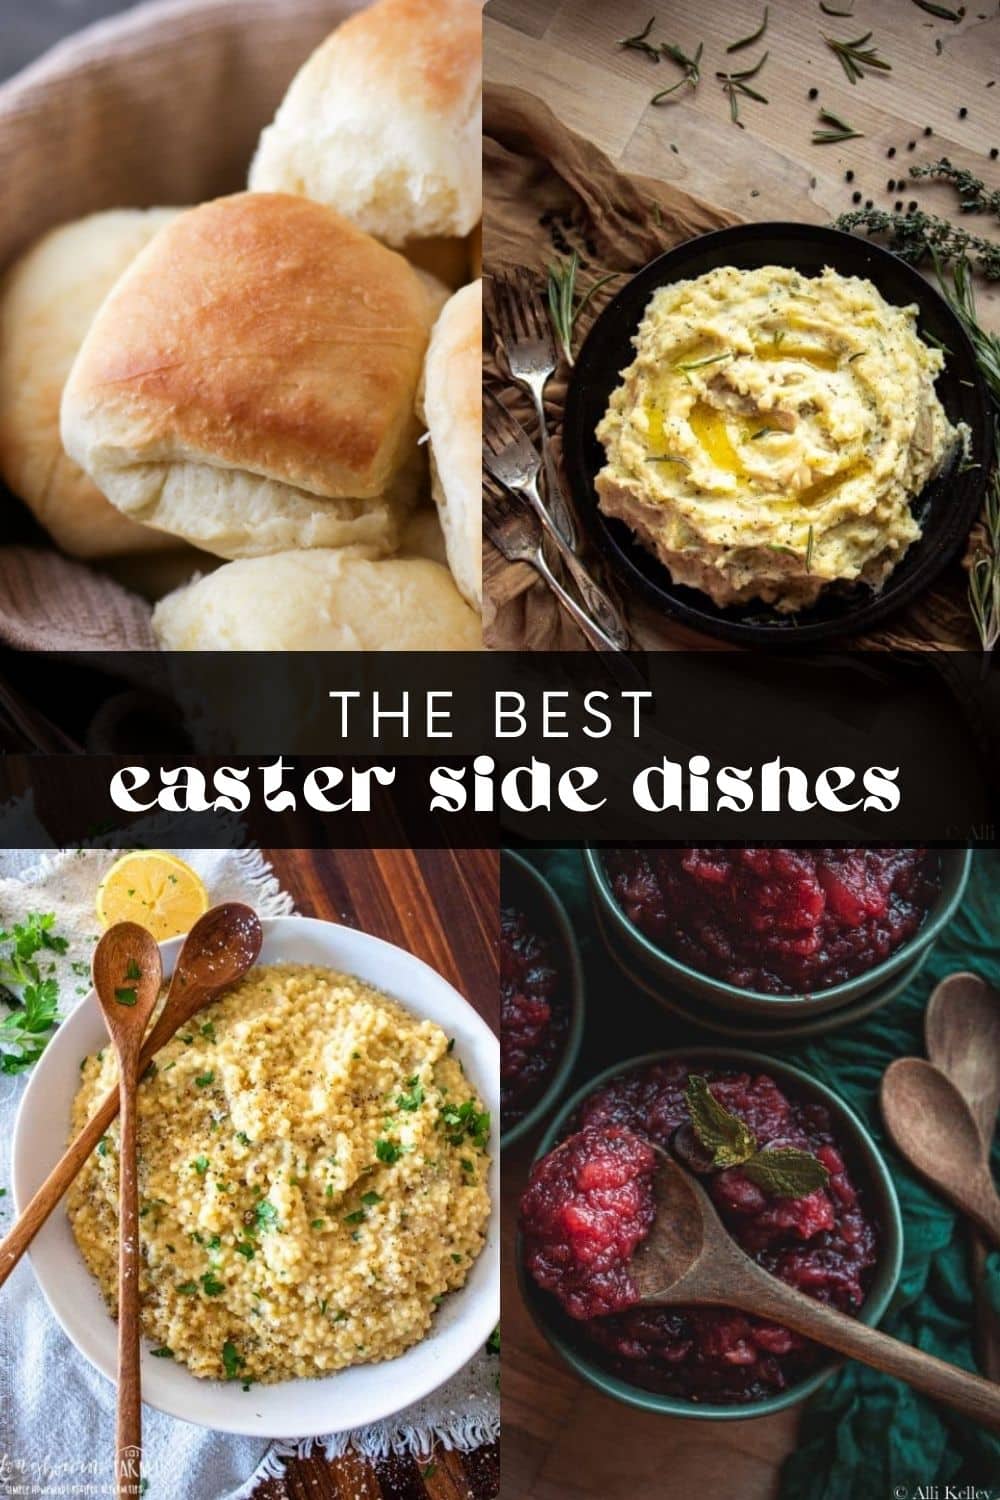 The ham or lamb might be the stars of your Easter dinner, but let's be serious: the sides are where it's at! From the best-ever Brussels sprouts to make-ahead pasta salads, these Easter side dishes will make this year's feast one to remember.